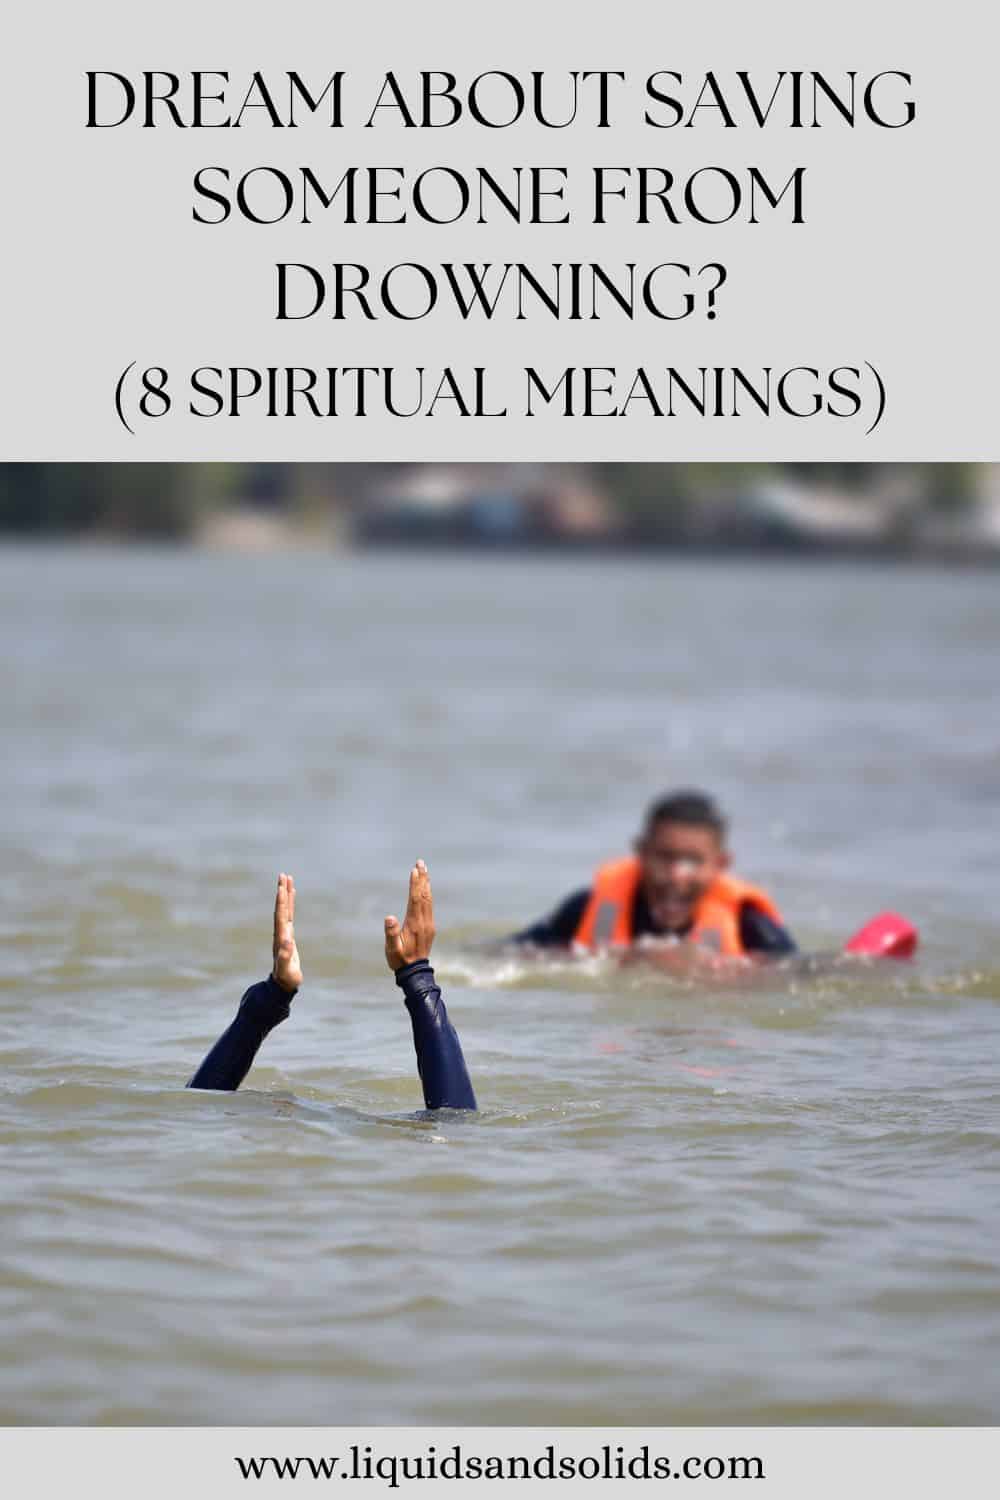 Dream About Saving Someone from Drowning? (8 Spiritual Meanings)